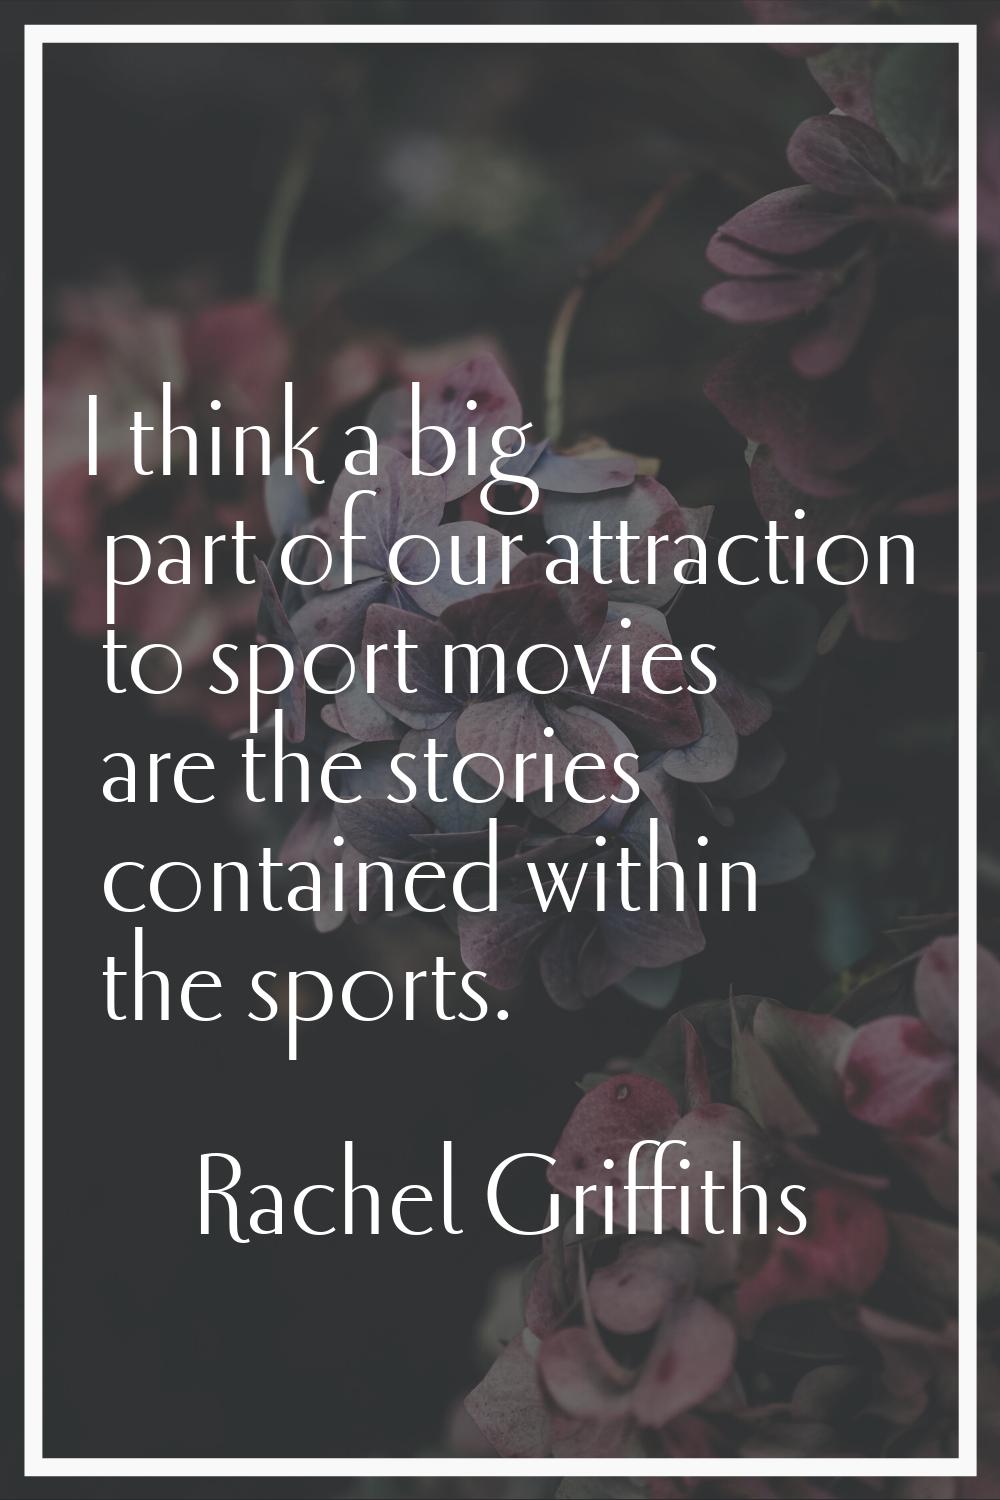 I think a big part of our attraction to sport movies are the stories contained within the sports.